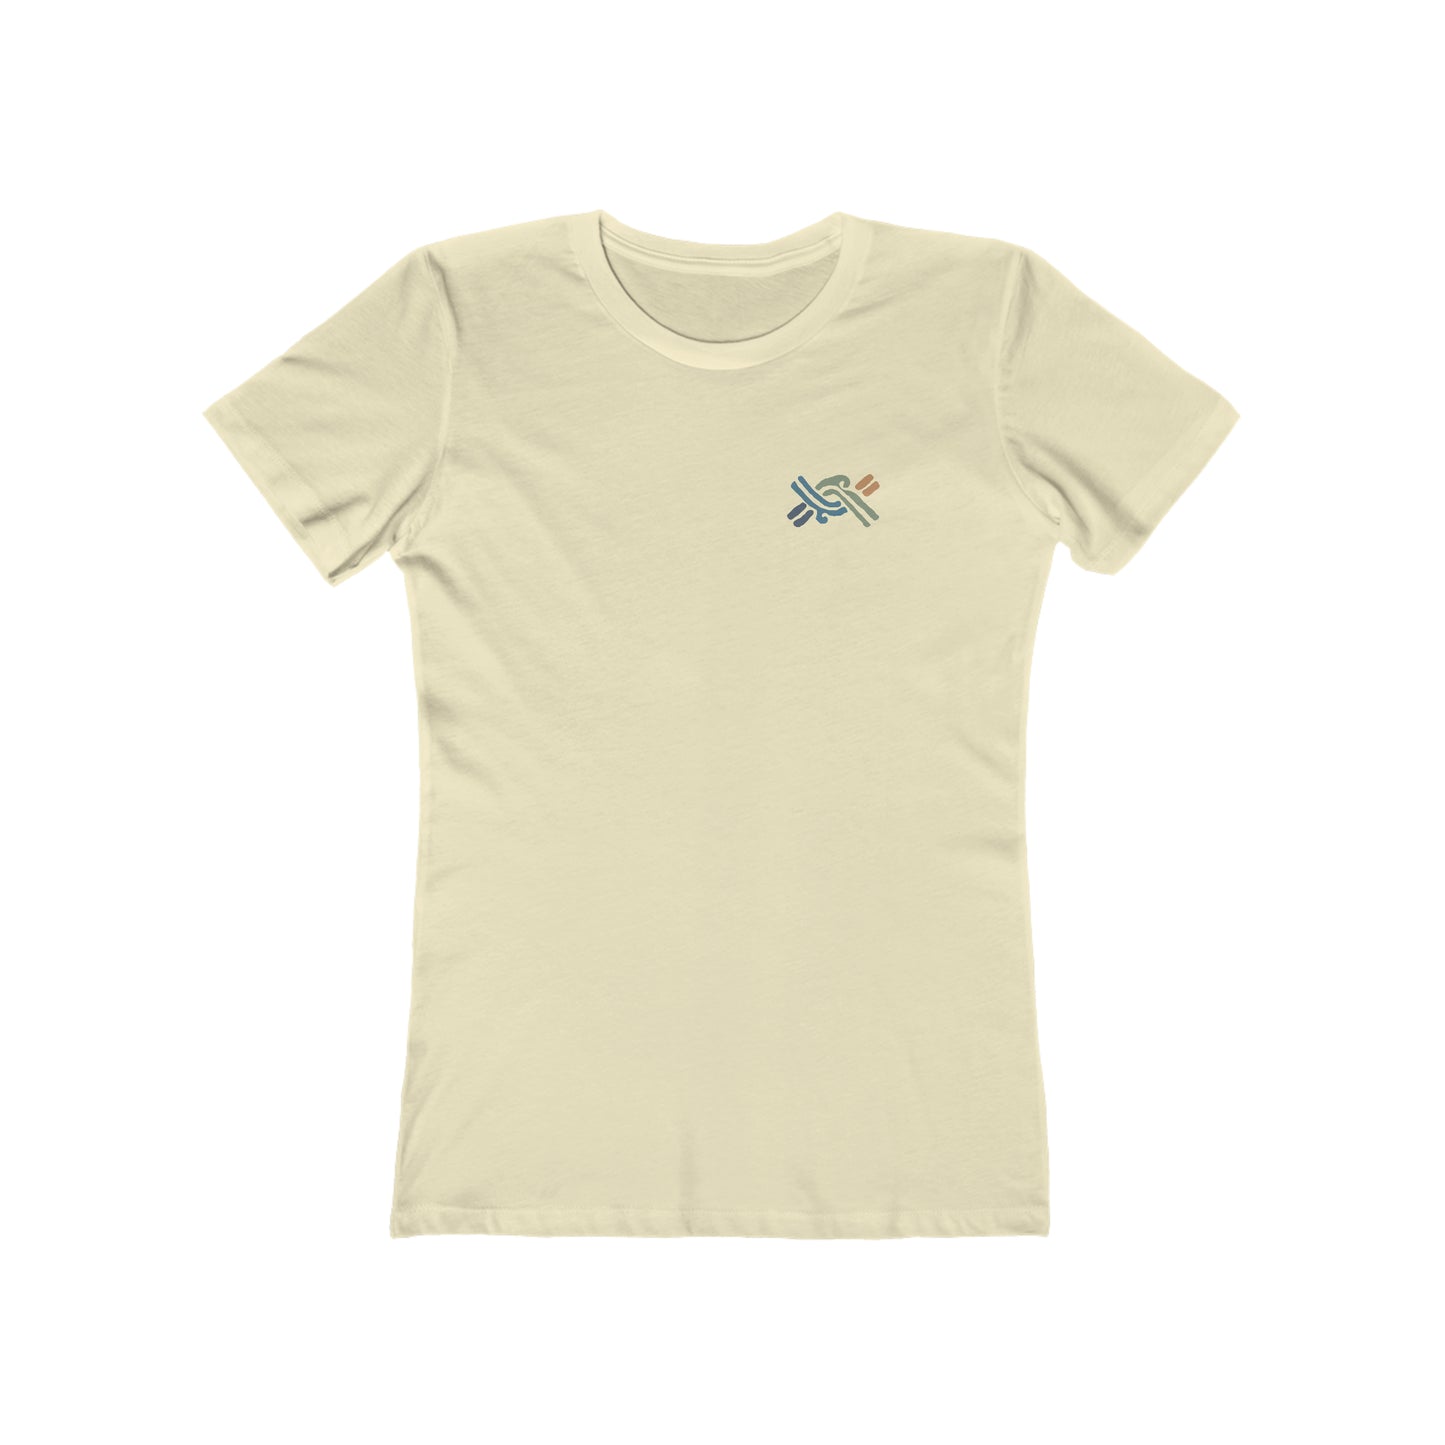 Helping Churches End Poverty Women's T-shirt